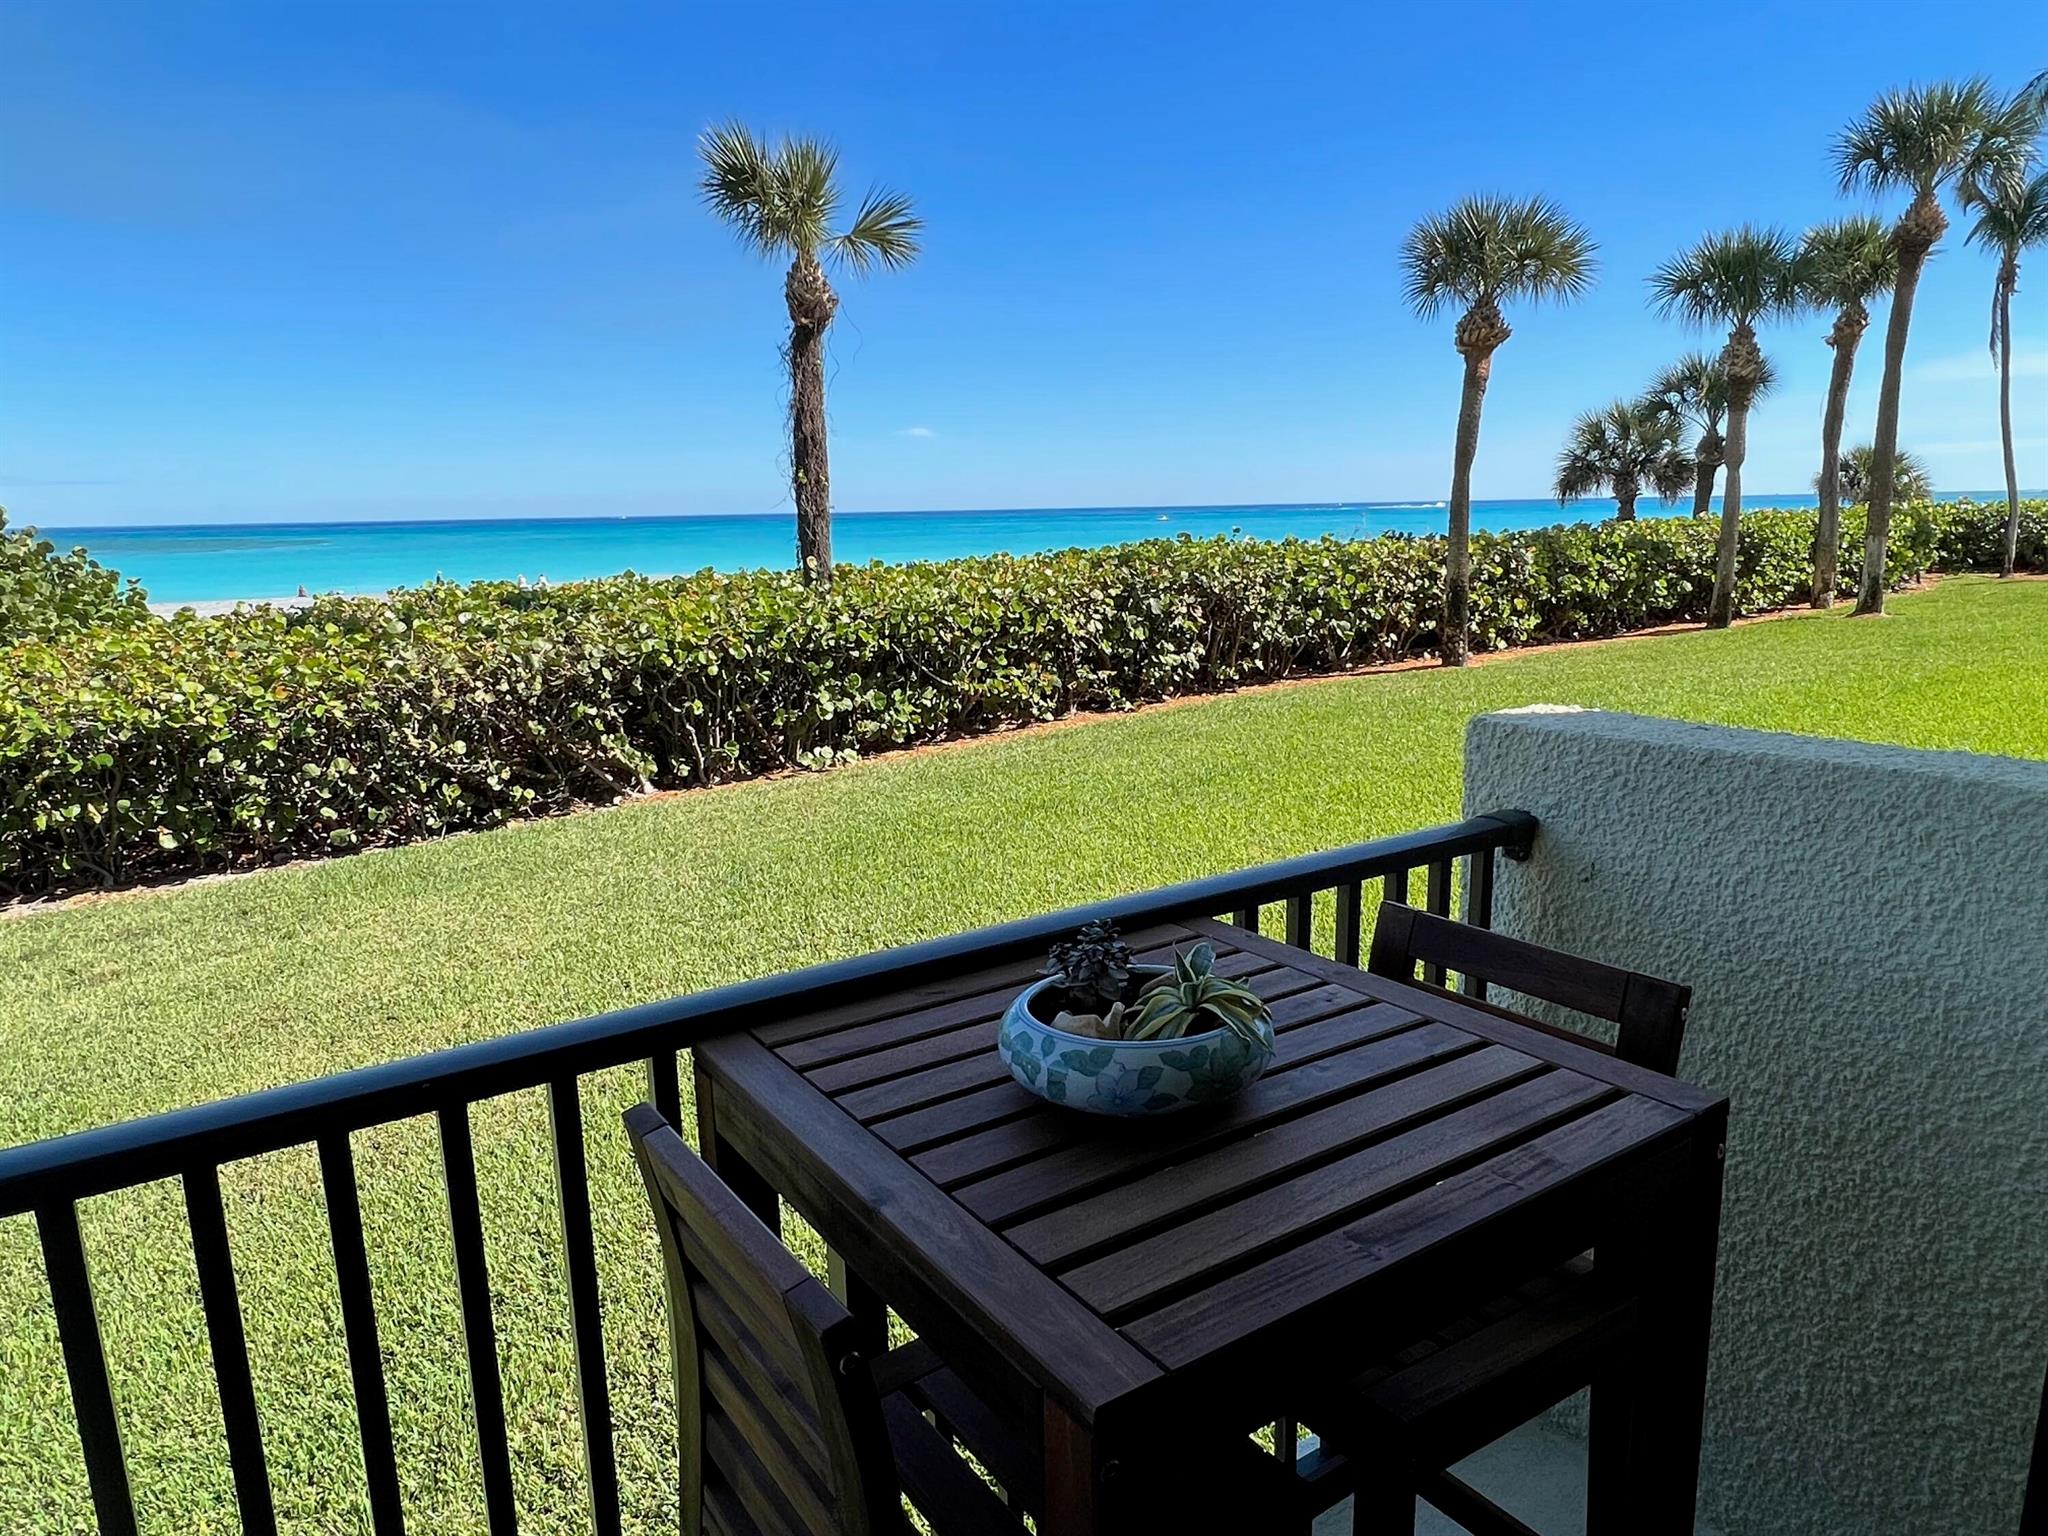 This spacious ocean end unit offers direct ocean views from its 2 balconies, porch and over-sized private terrace next to the ocean. Just steps away from the ocean and beach-side pool, this unit is equipped with impact windows for added quietness and safety. Amenities at Ocean Trail include 9 tennis courts, a fitness center, community rooms, and heated lap and resort-style pools. Don't miss this opportunity to experience the best of oceanfront living.